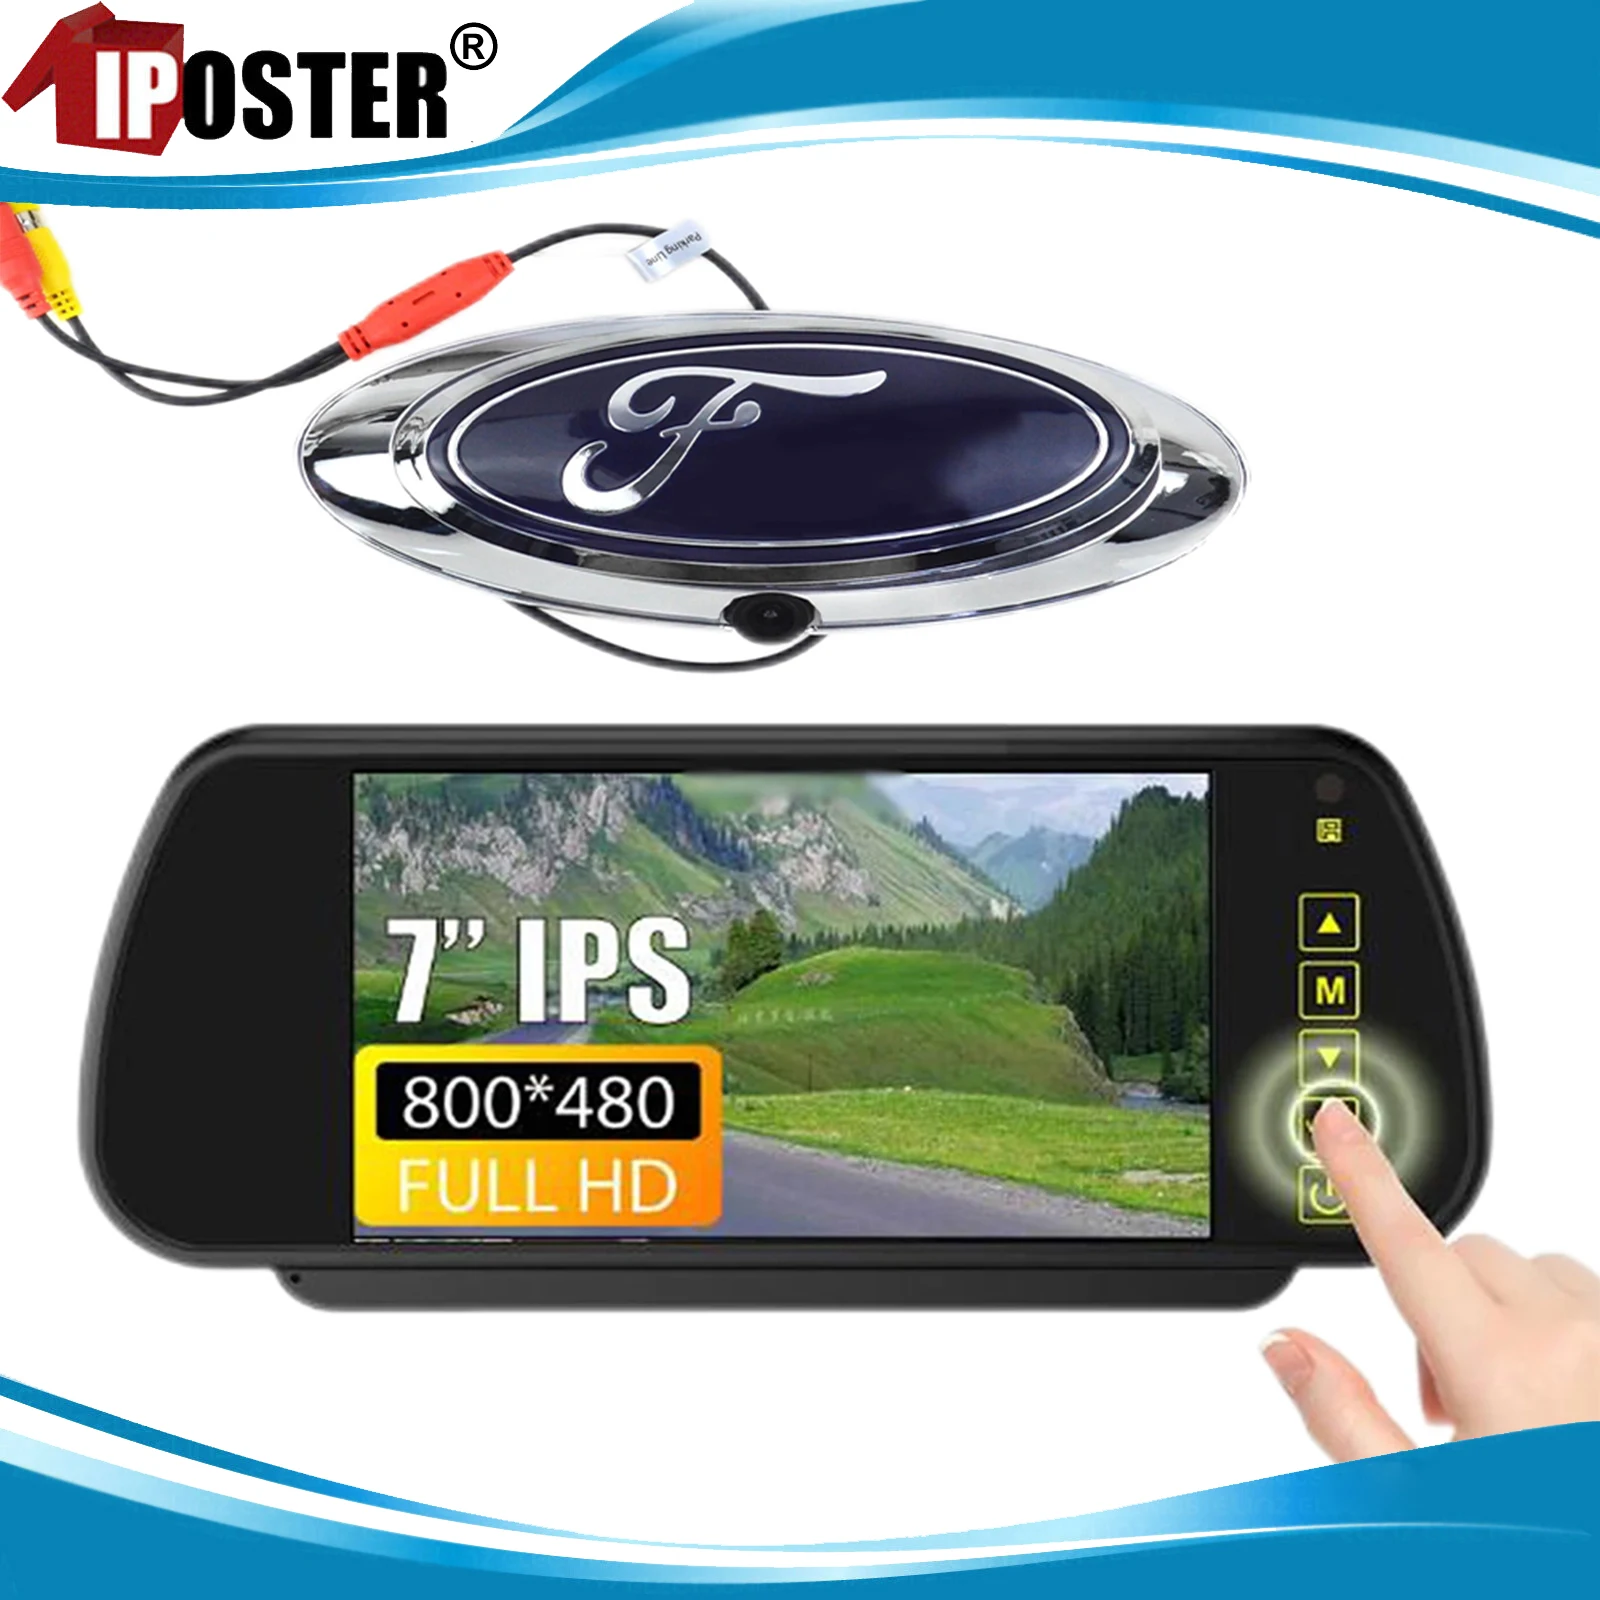 

iPoster 7" Rear View Mirror Monitor 800x480 Touchable With Emblem Reverse Backup HD Camera 170 Degree Kit For Truck Rv Bus Car